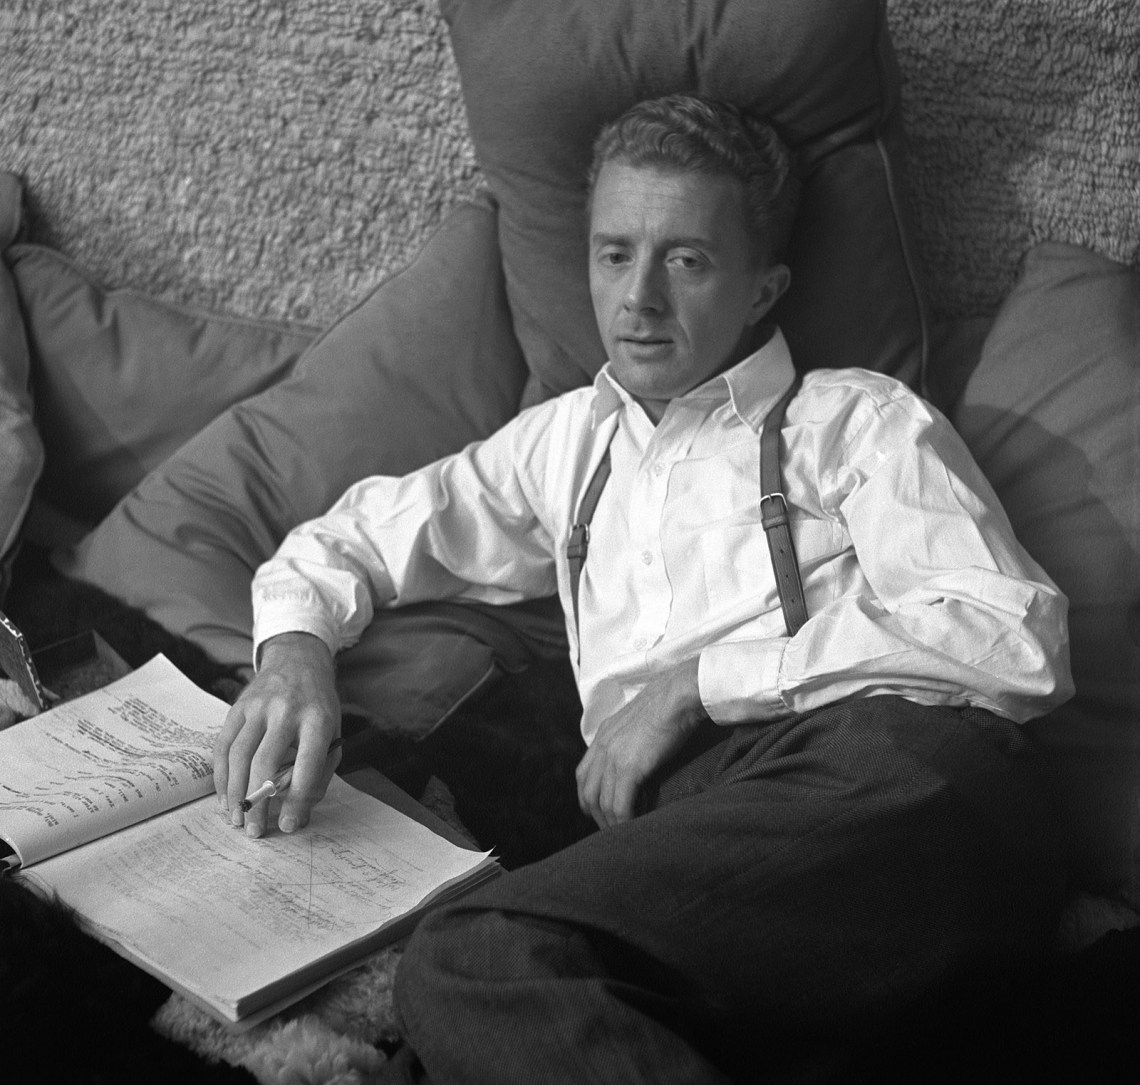 So Why Did I Defend Paul Bowles?